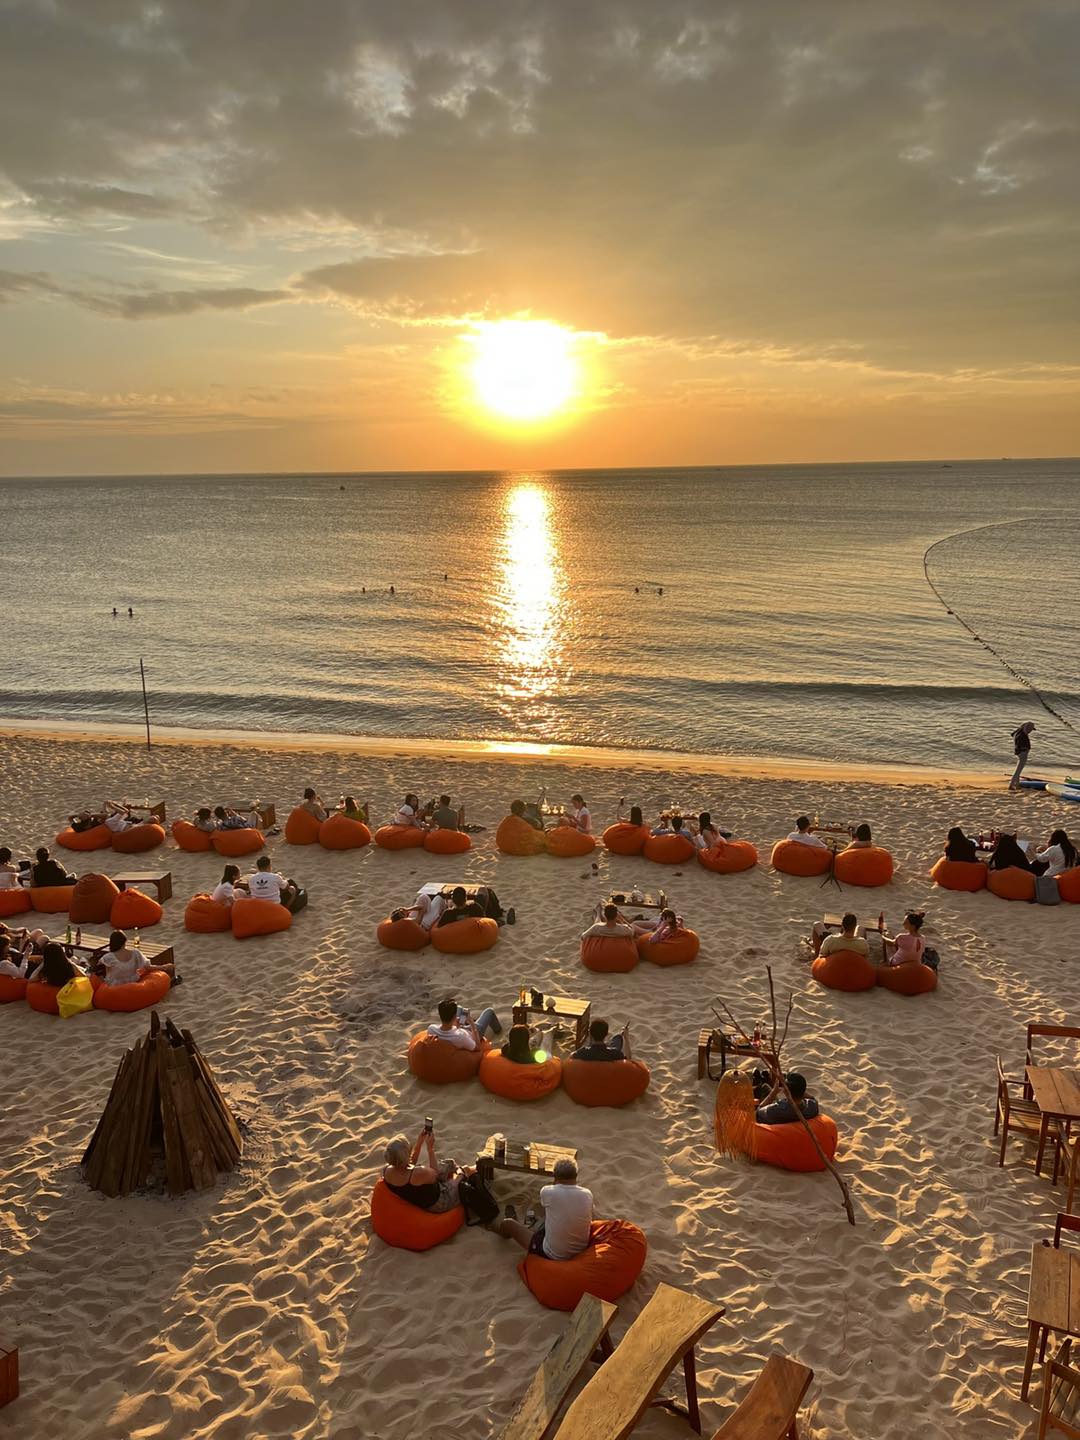 Long Beach is the liveliest beach in Phu Quoc with many restaurants and bars - Photo: OCSEN Bar